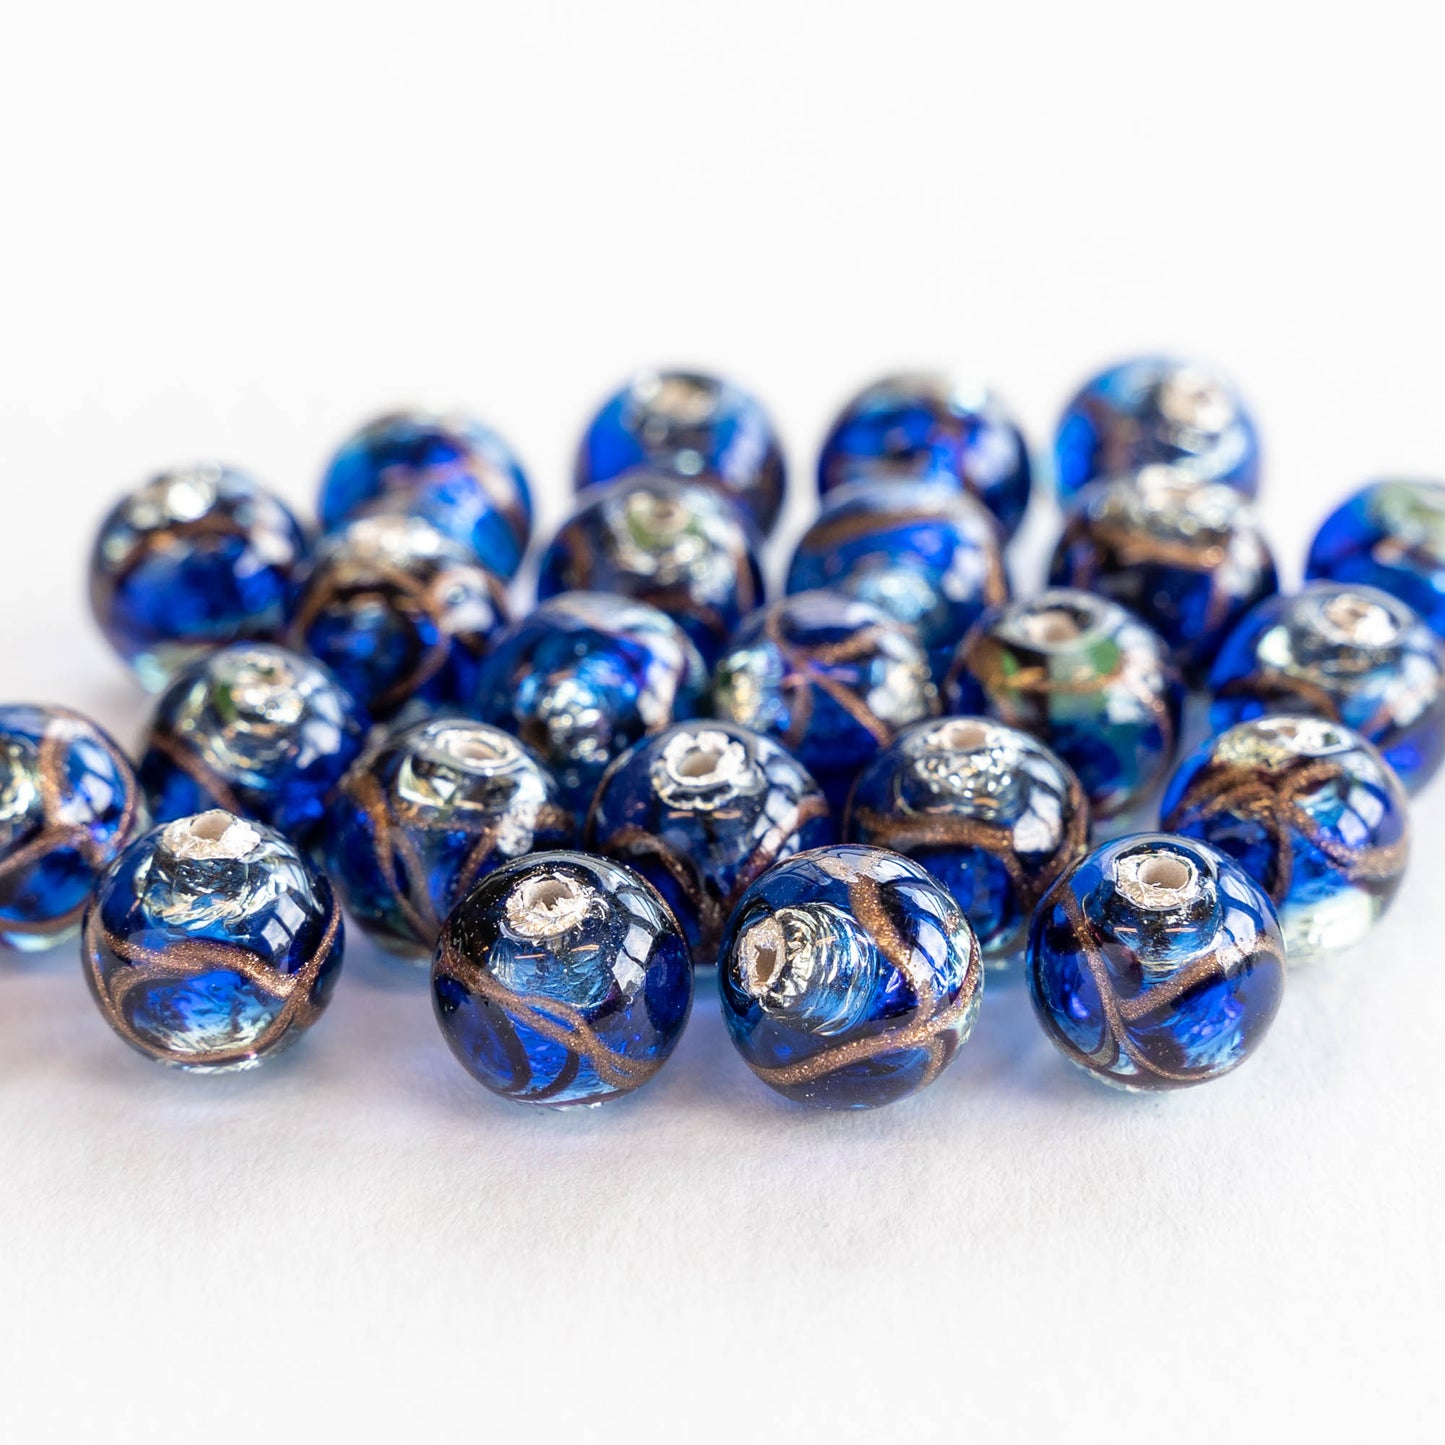 MIC Sky Blue Gold Silver Foil Alphabet Lampwork Glass Beads With Large Hole  For B Pretty Beads For Bracelets From Xuan16888, $0.41